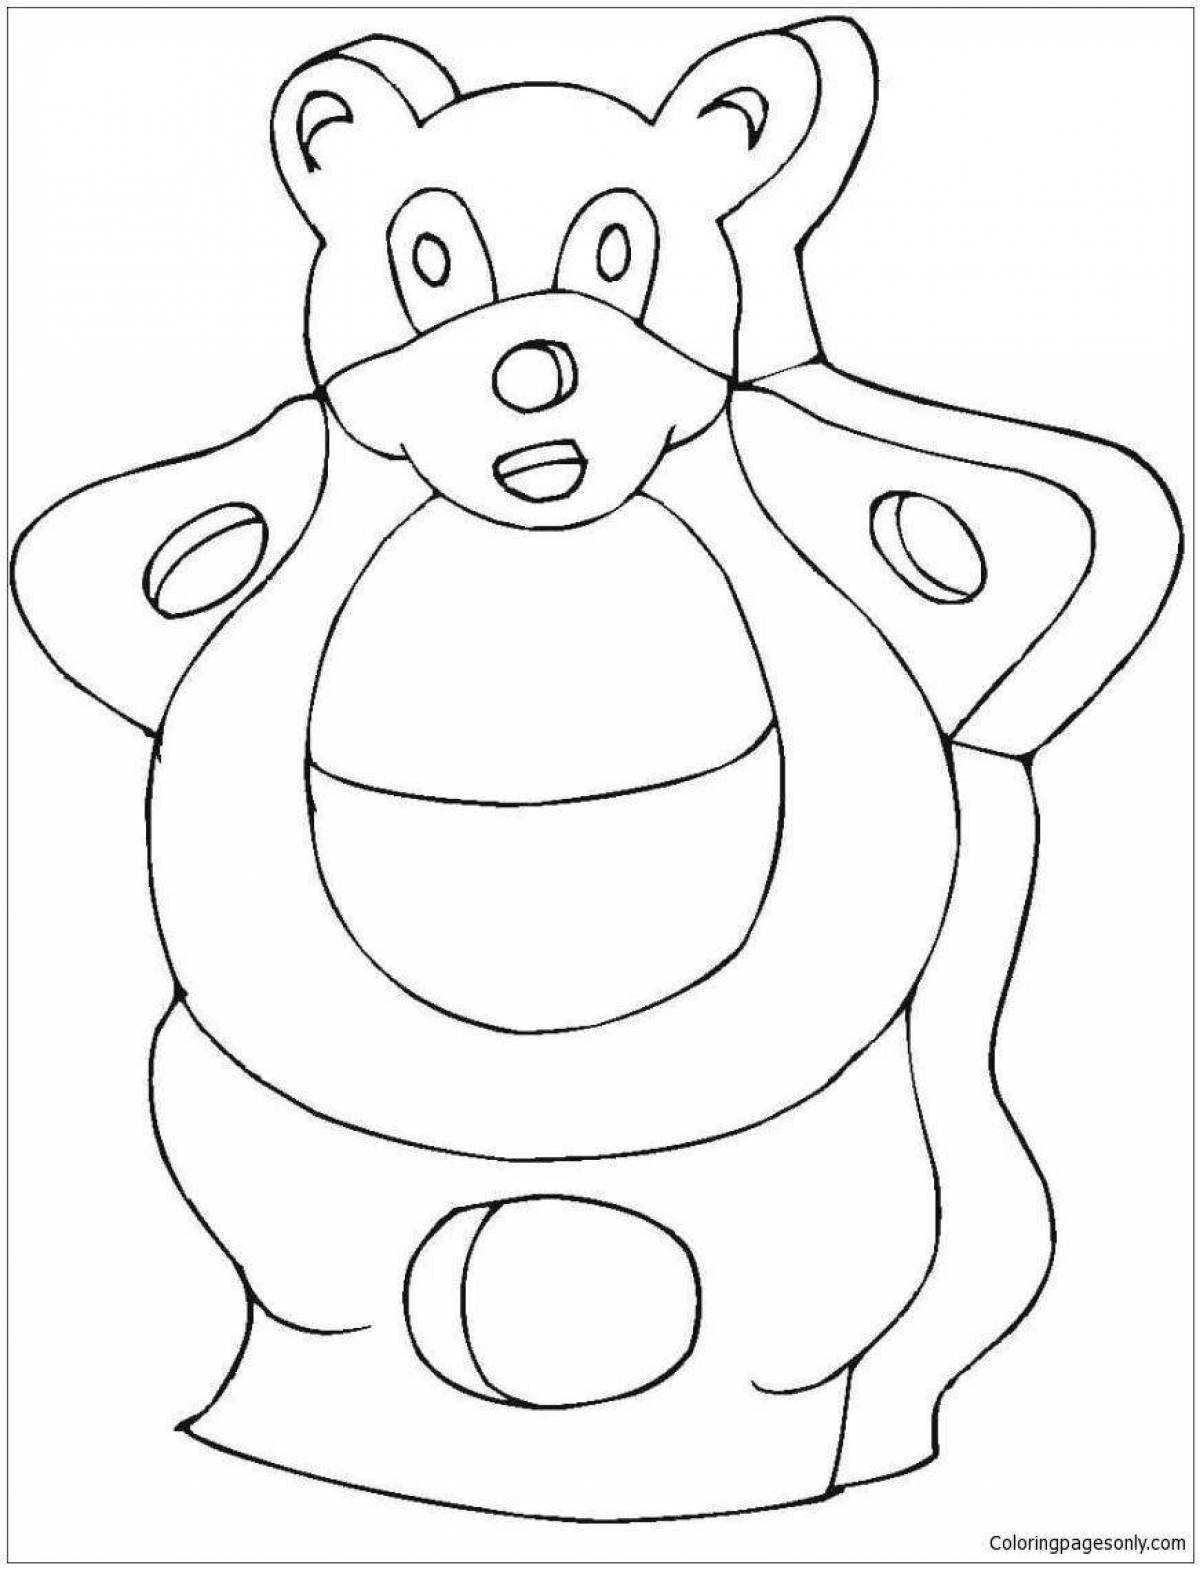 Coloring book exquisite jelly bear valera